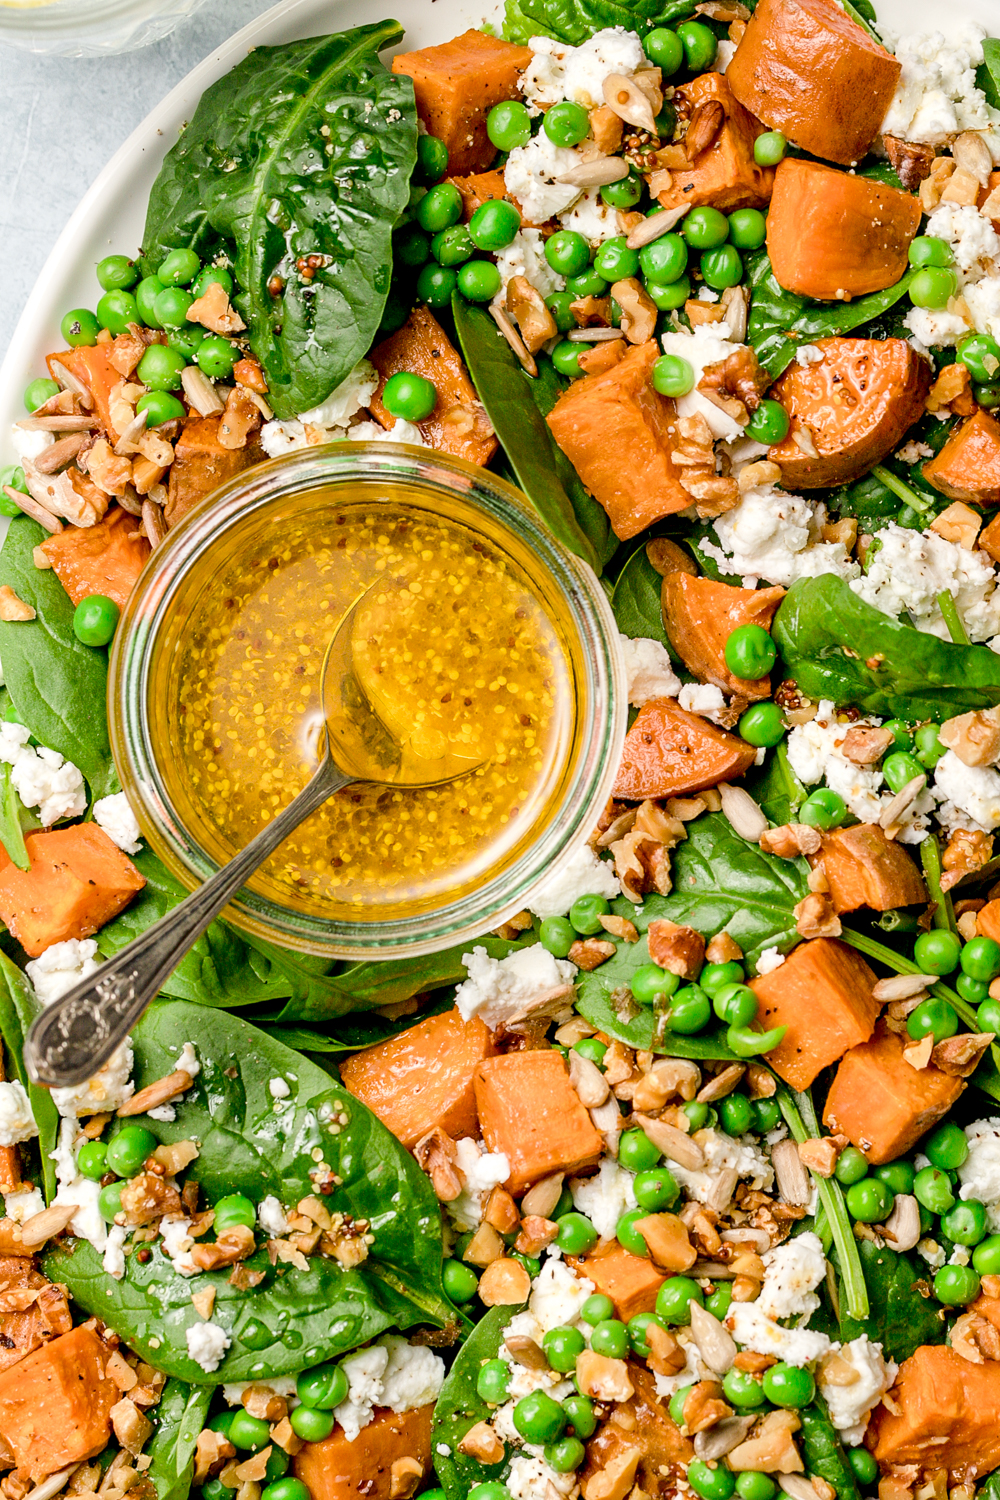 oval plate with sweet potato and baby spinach salad with mustard dressing